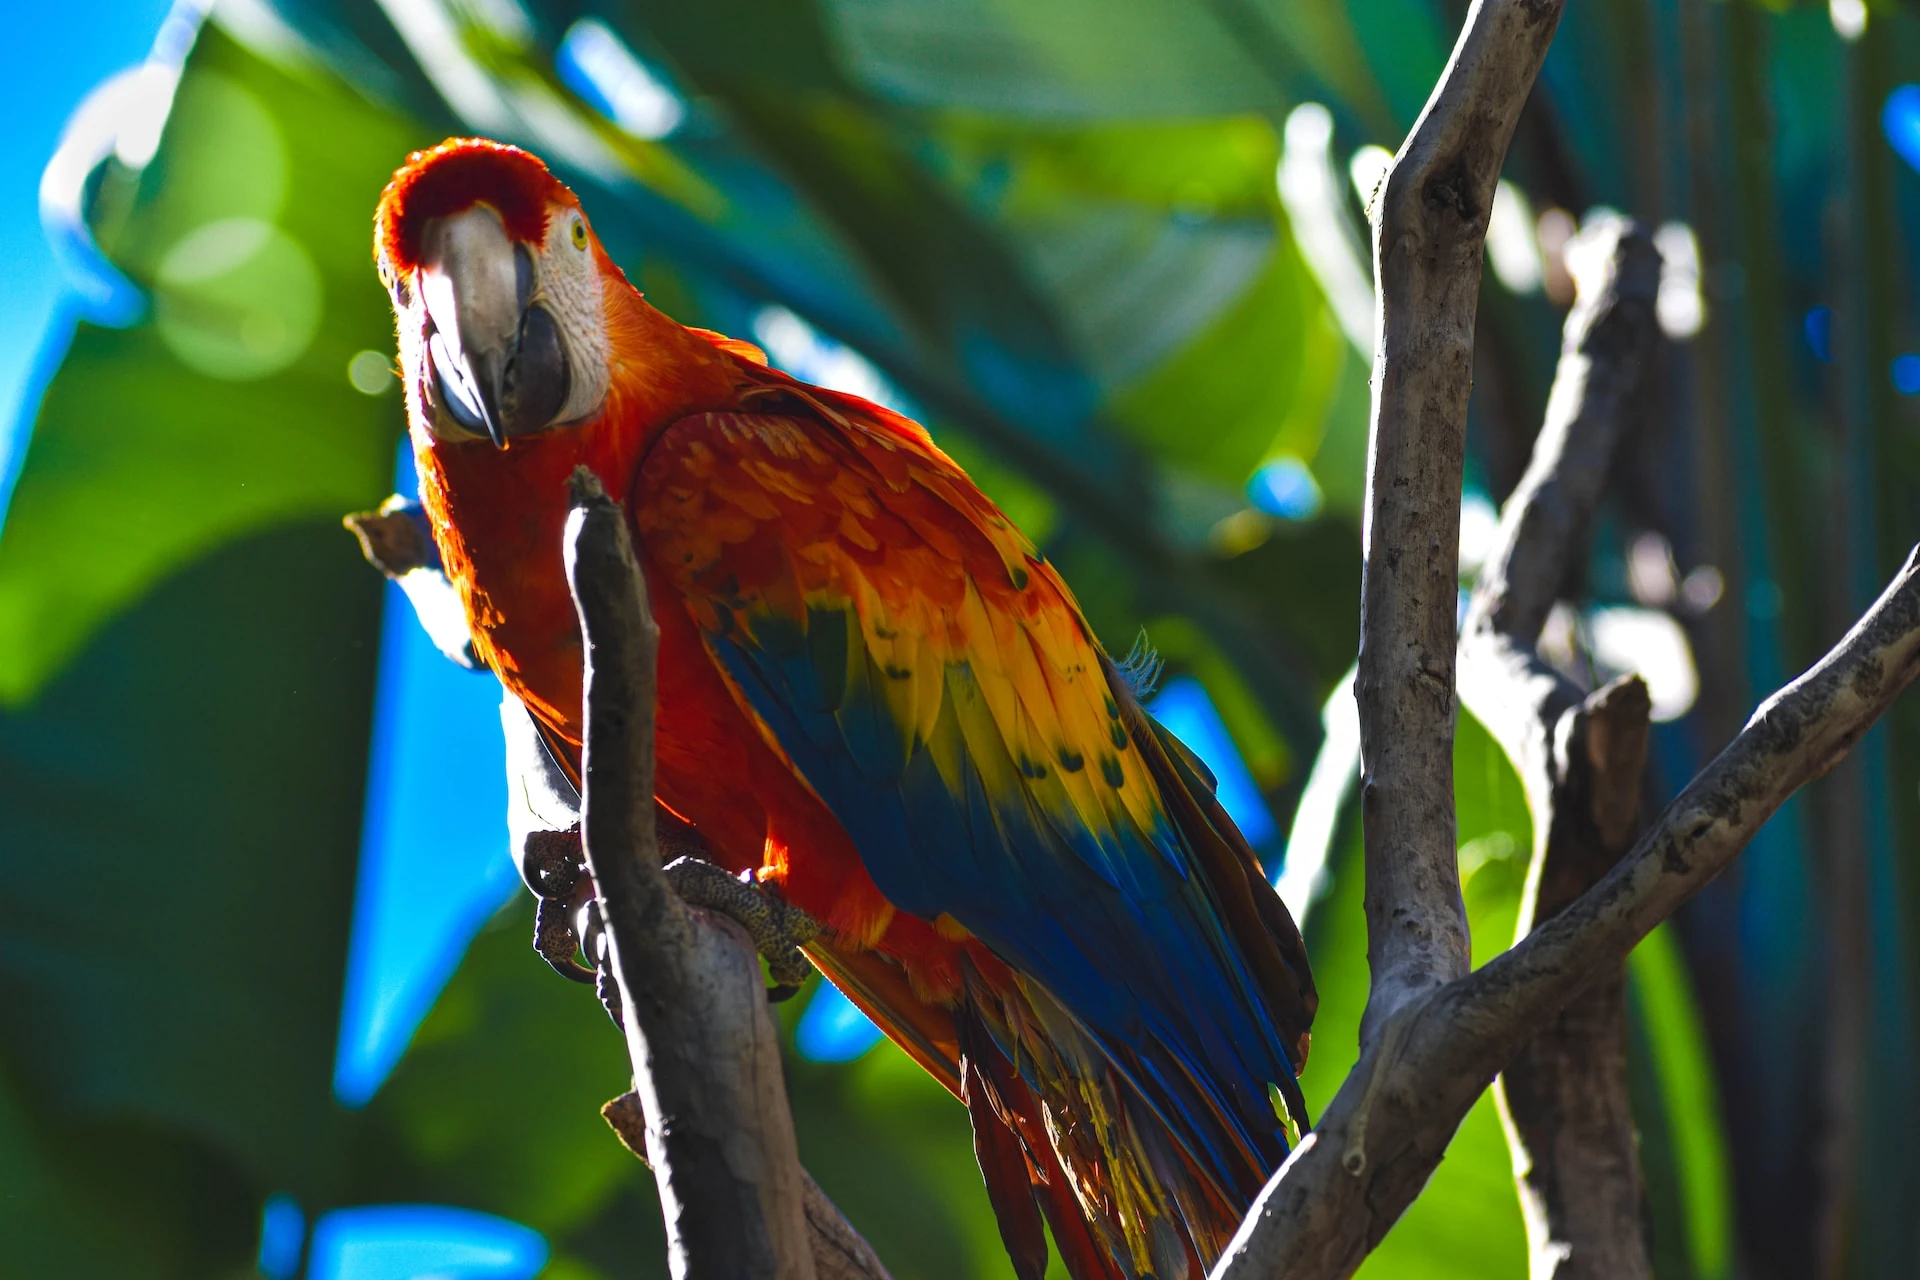 Macaws in Peru: Vibrant Feathers in the Amazon